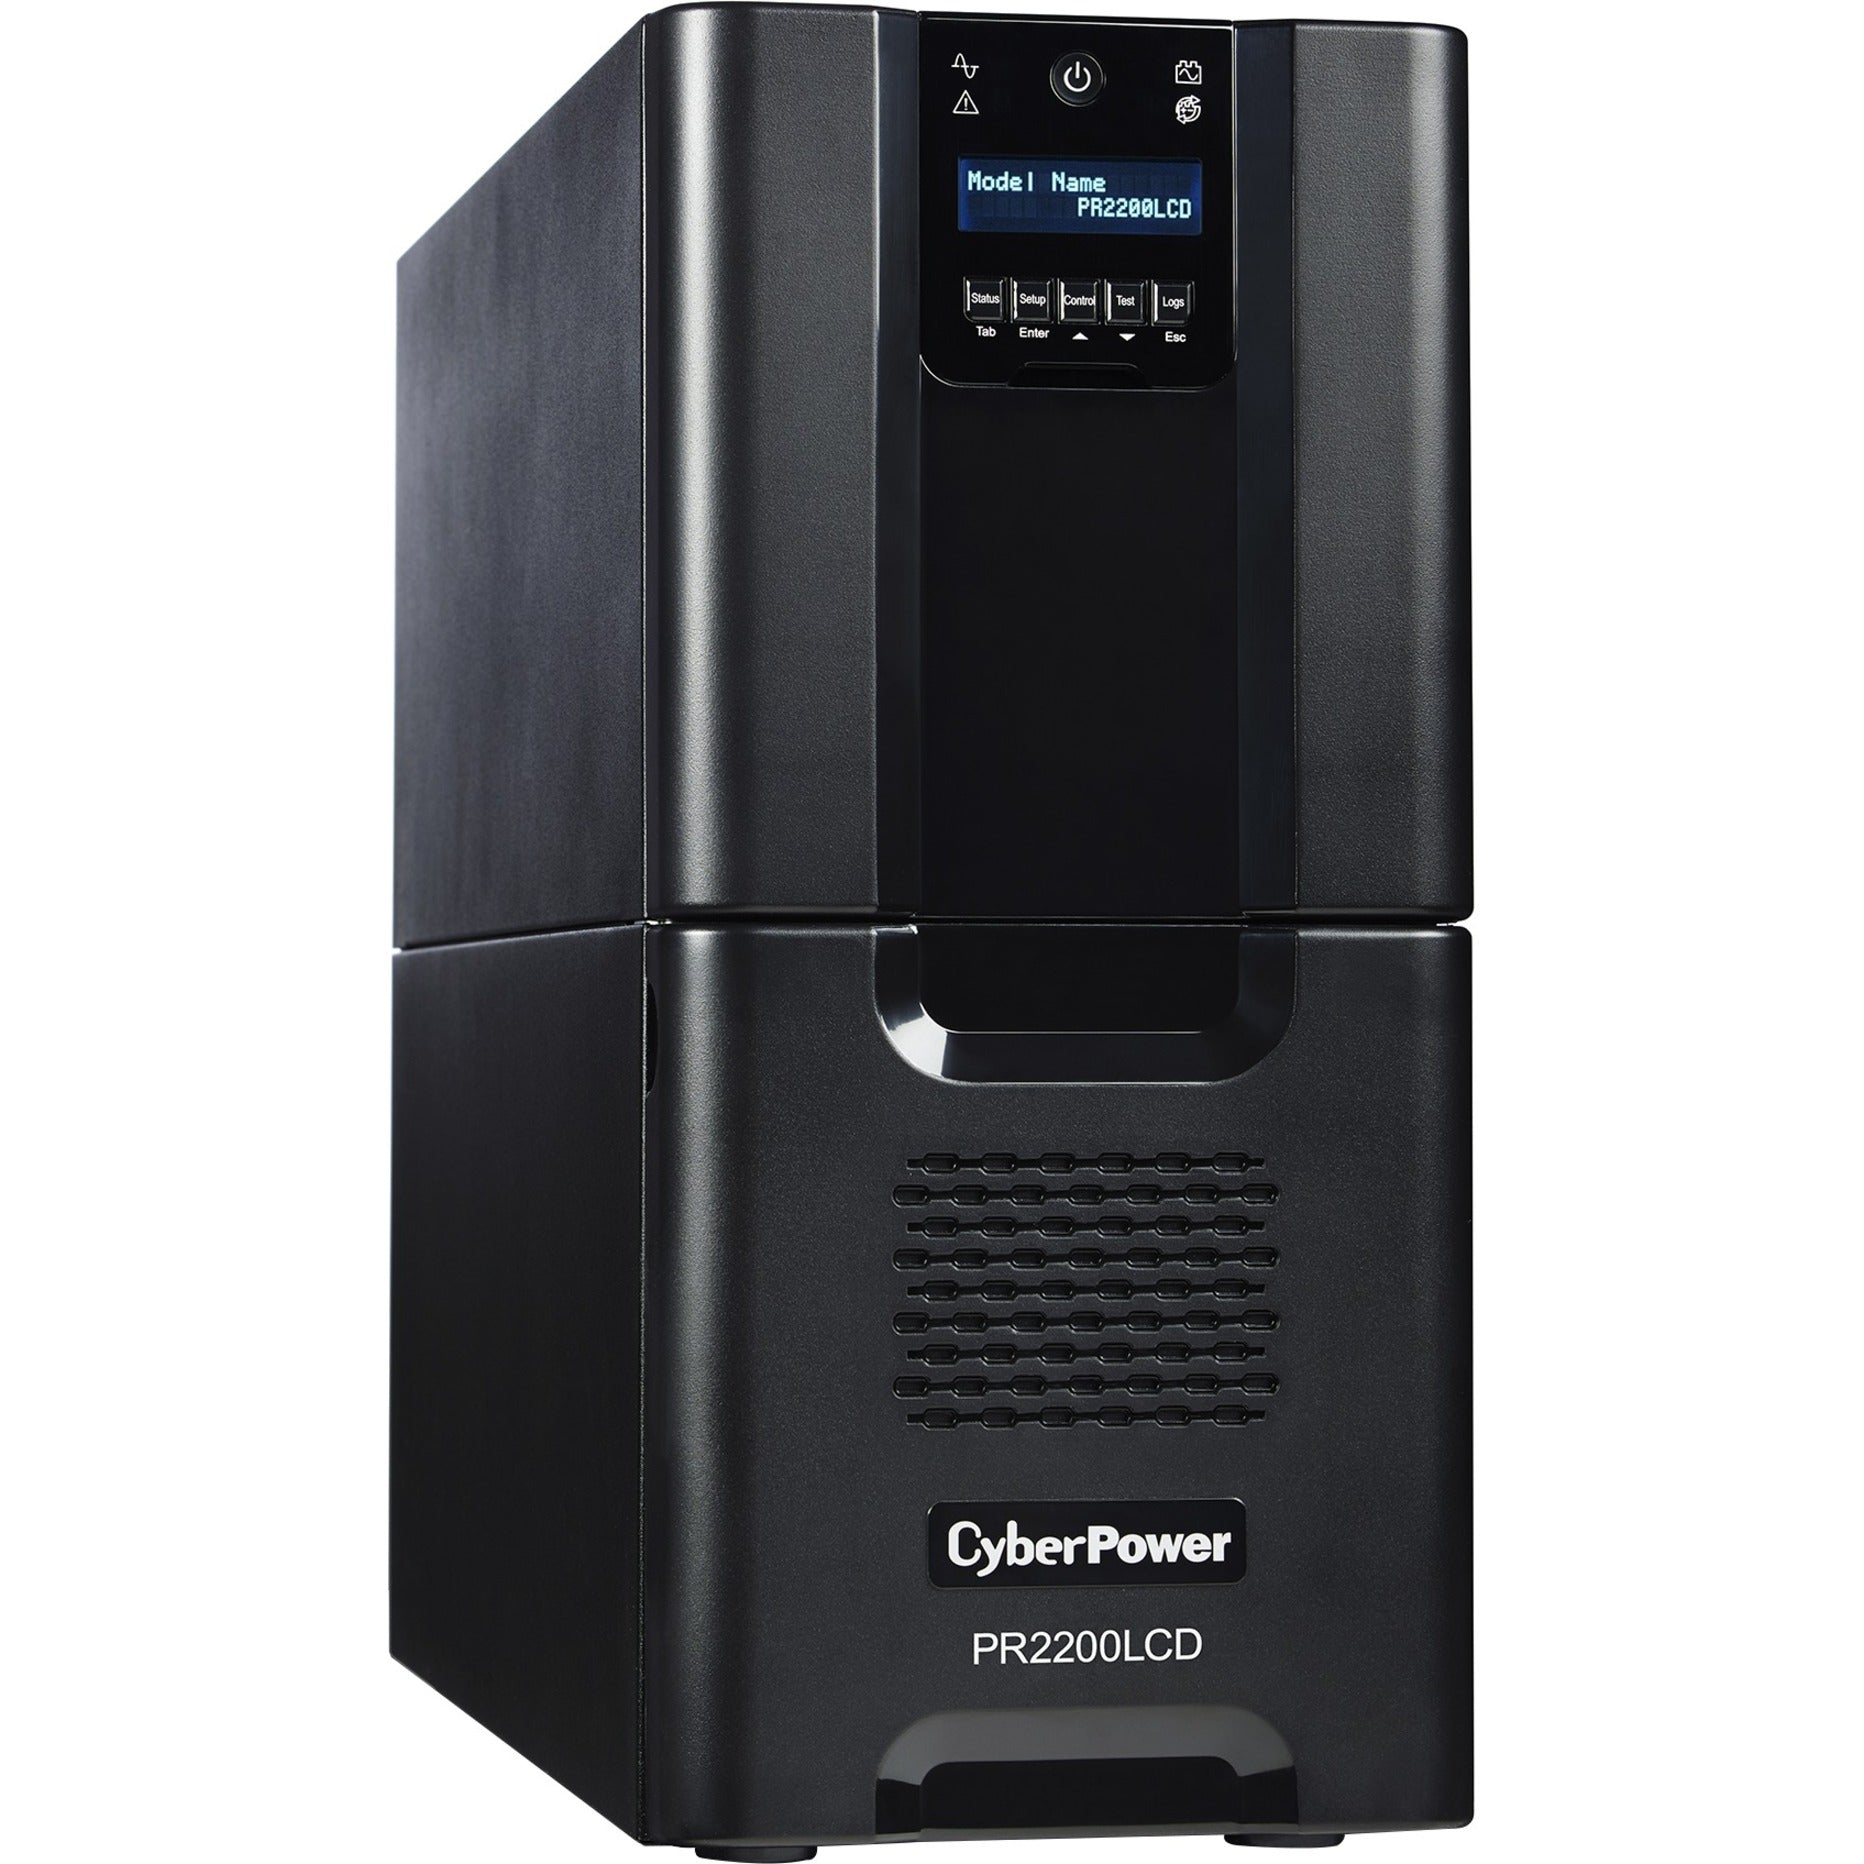 CyberPower PR2200LCD Smart App Sinewave UPS Systems, 2200VA Pure Sine Wave Tower LCD UPS